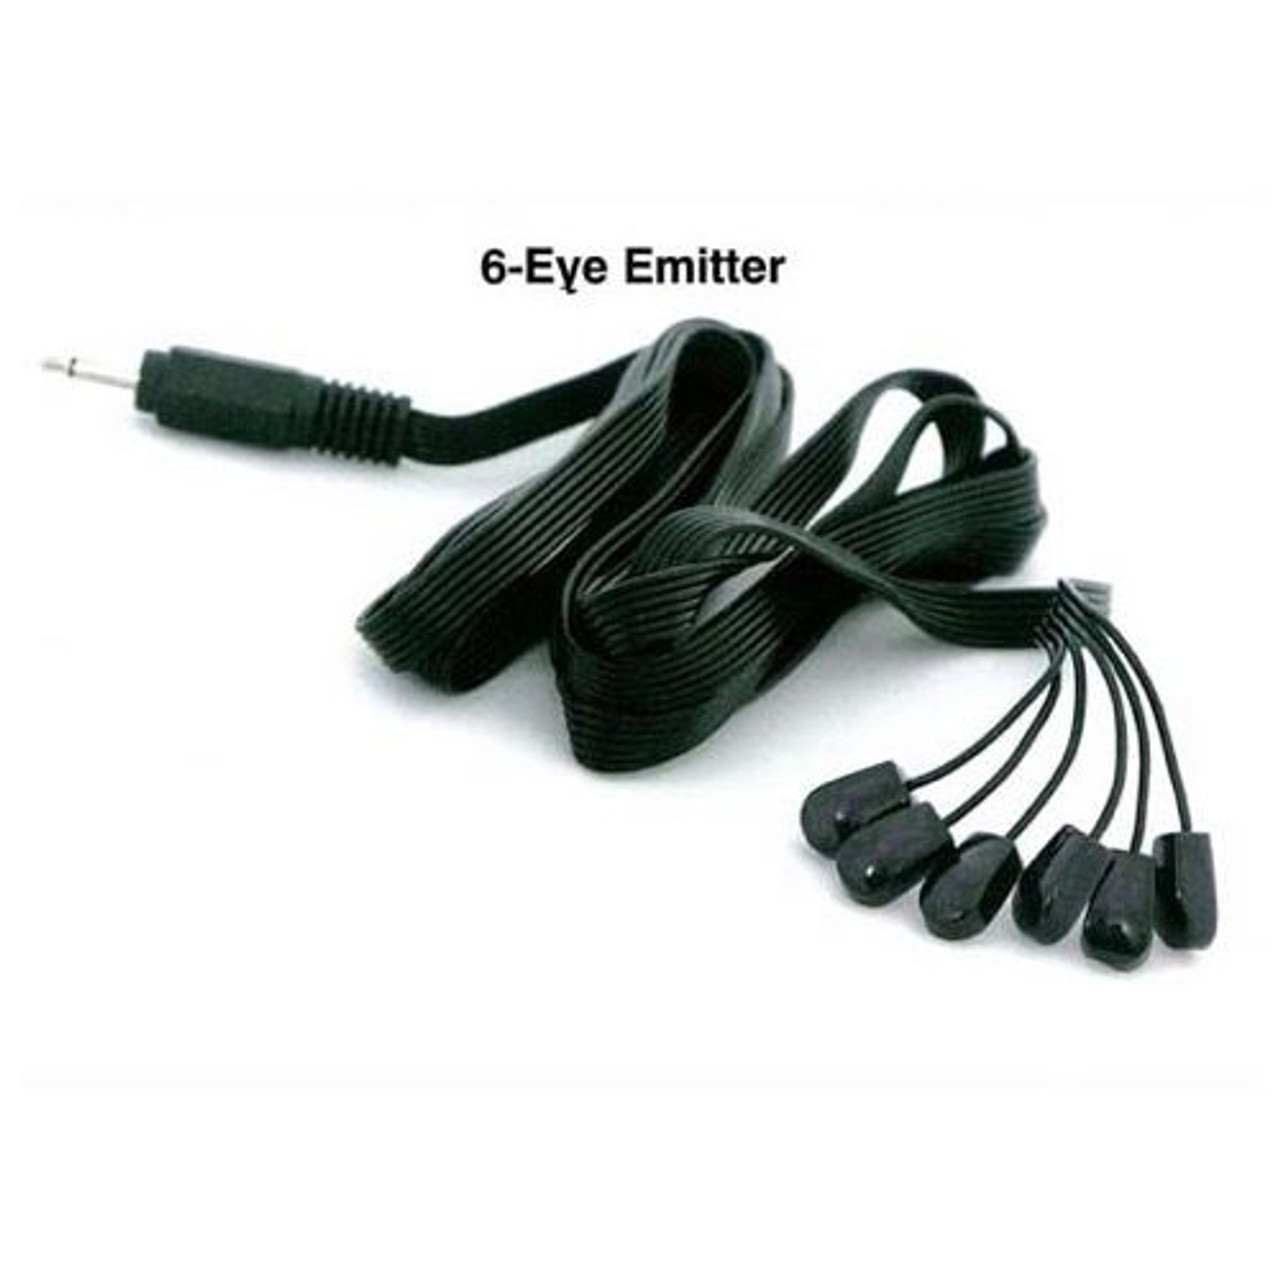 NEXTGEN 6 Eye Head Emitter IR Infrared Cable Cord Tether Next Generation Remote Control Signal Extender for Around the House TV Audio Video Extenders, SB7AAA, LRRX, Part # ATHAAA